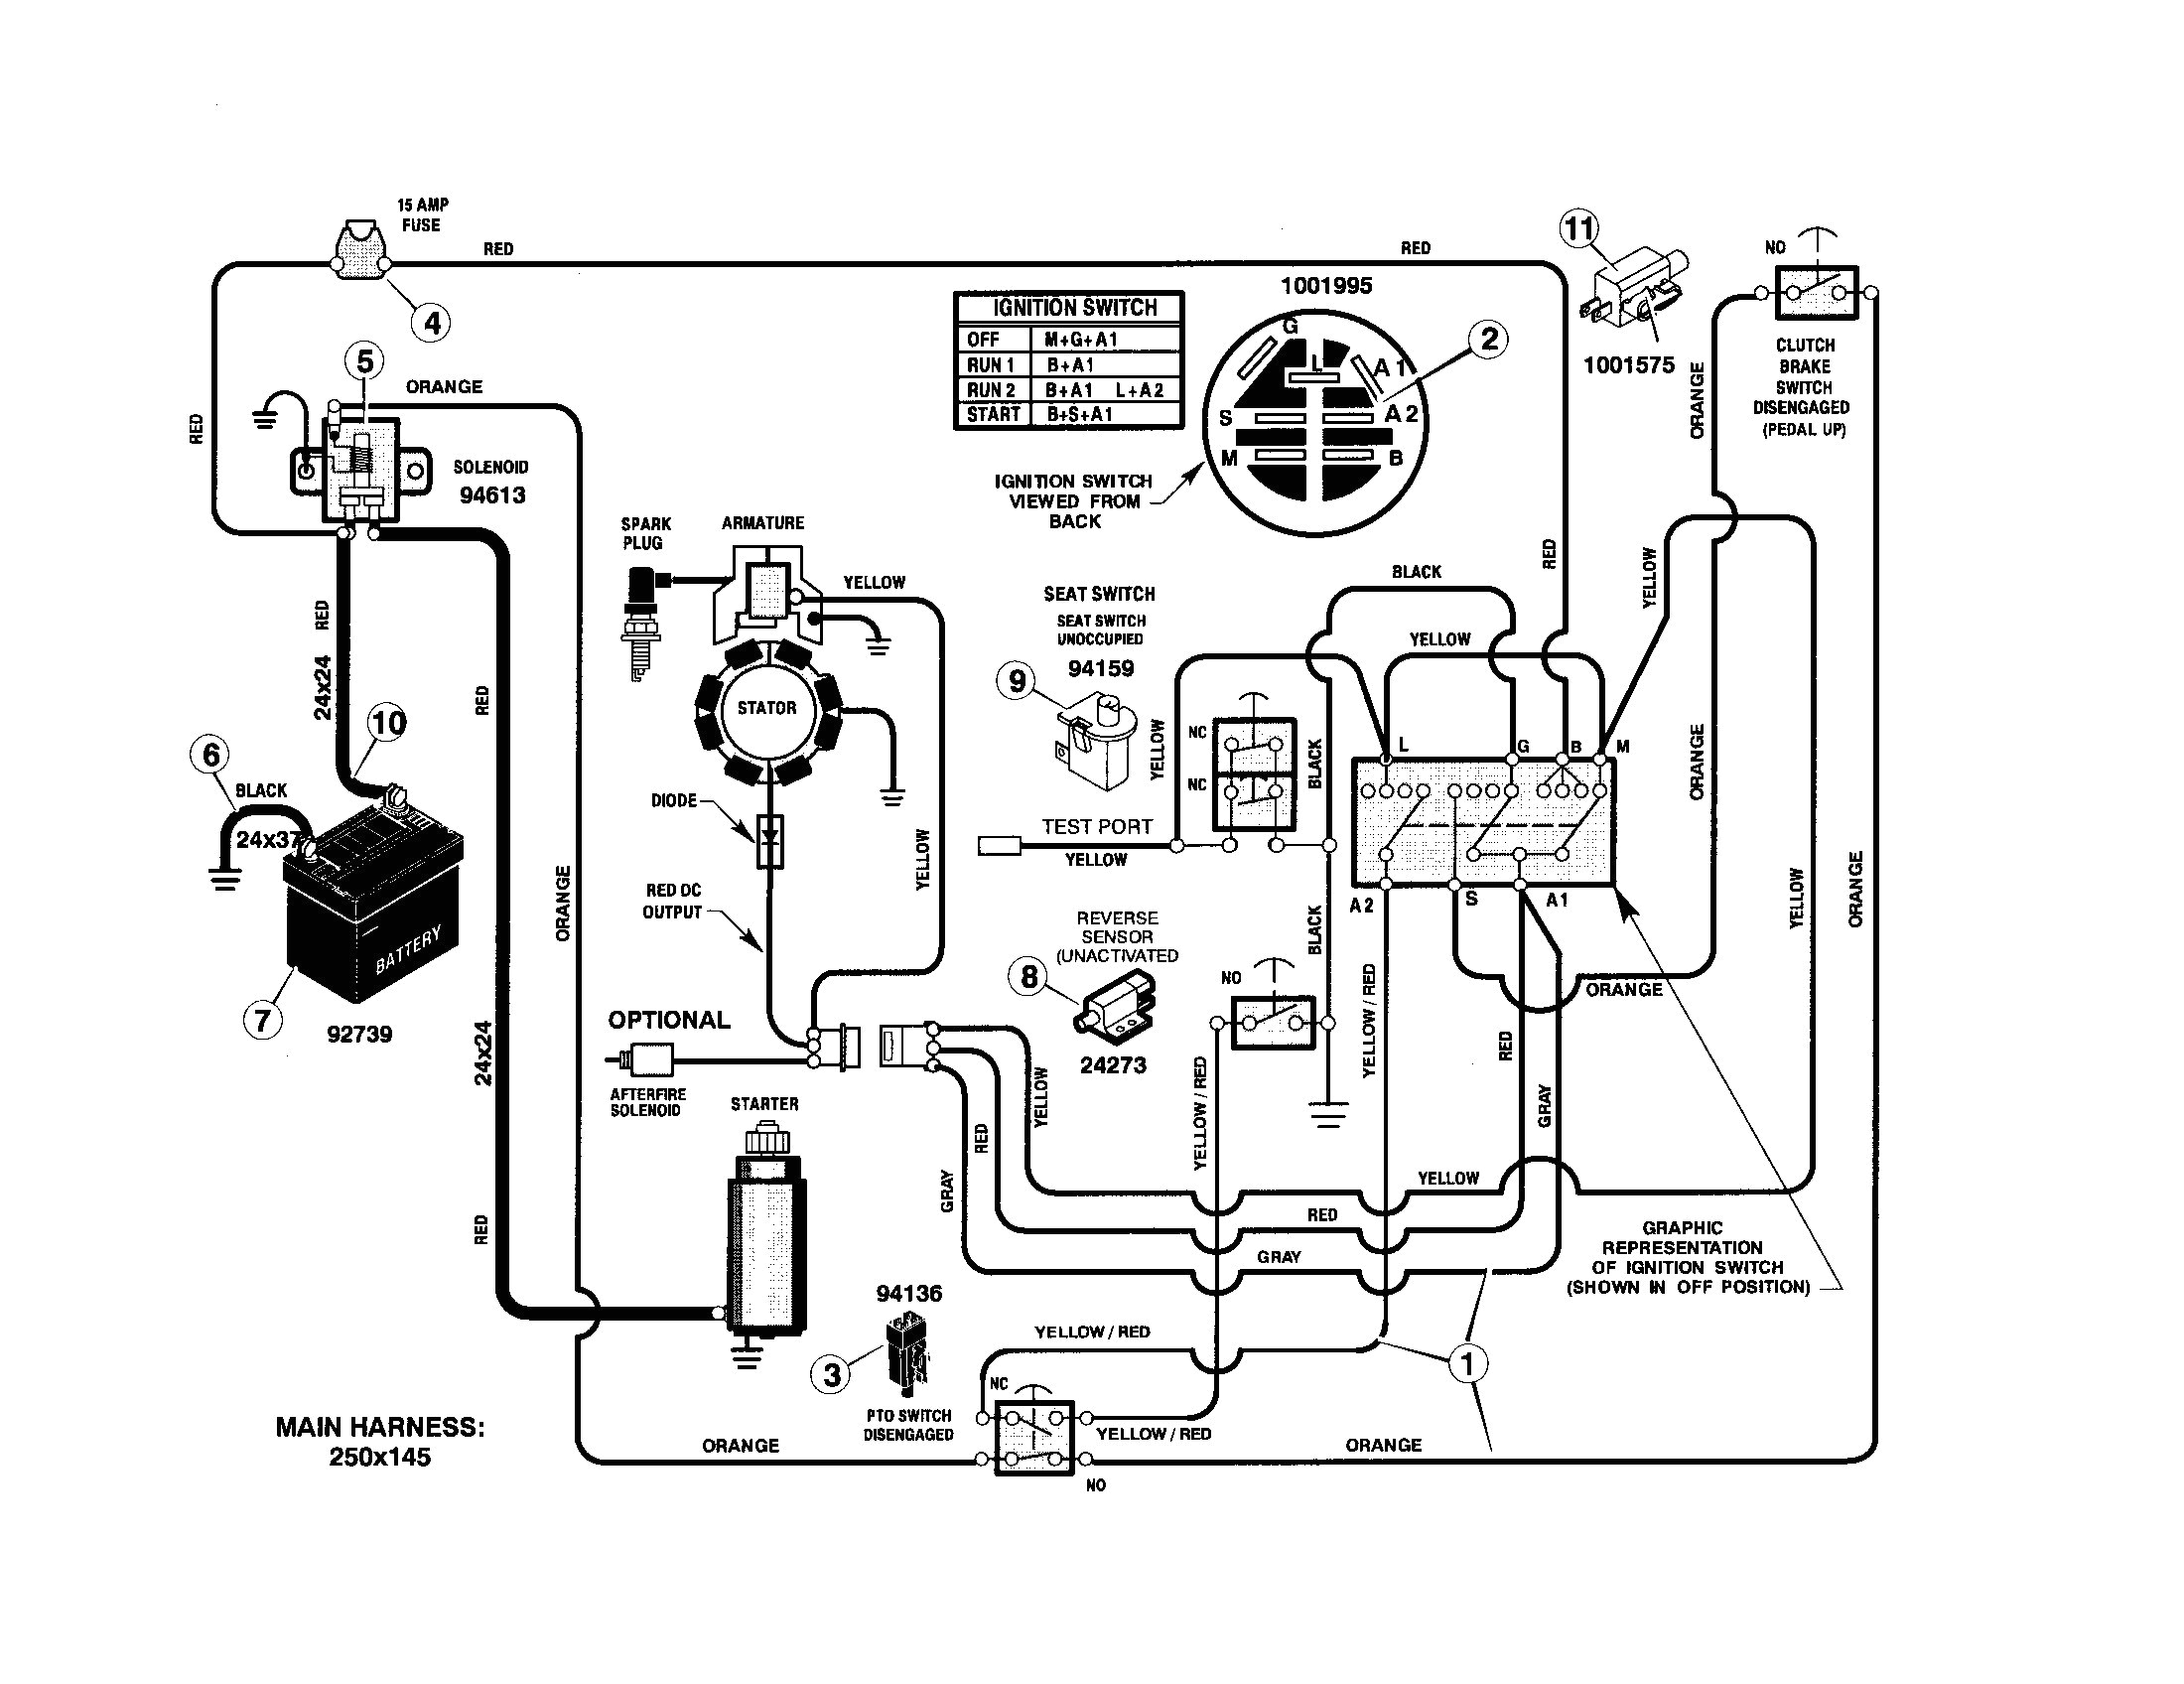 wiring diagram for murray riding lawn mower solenoid